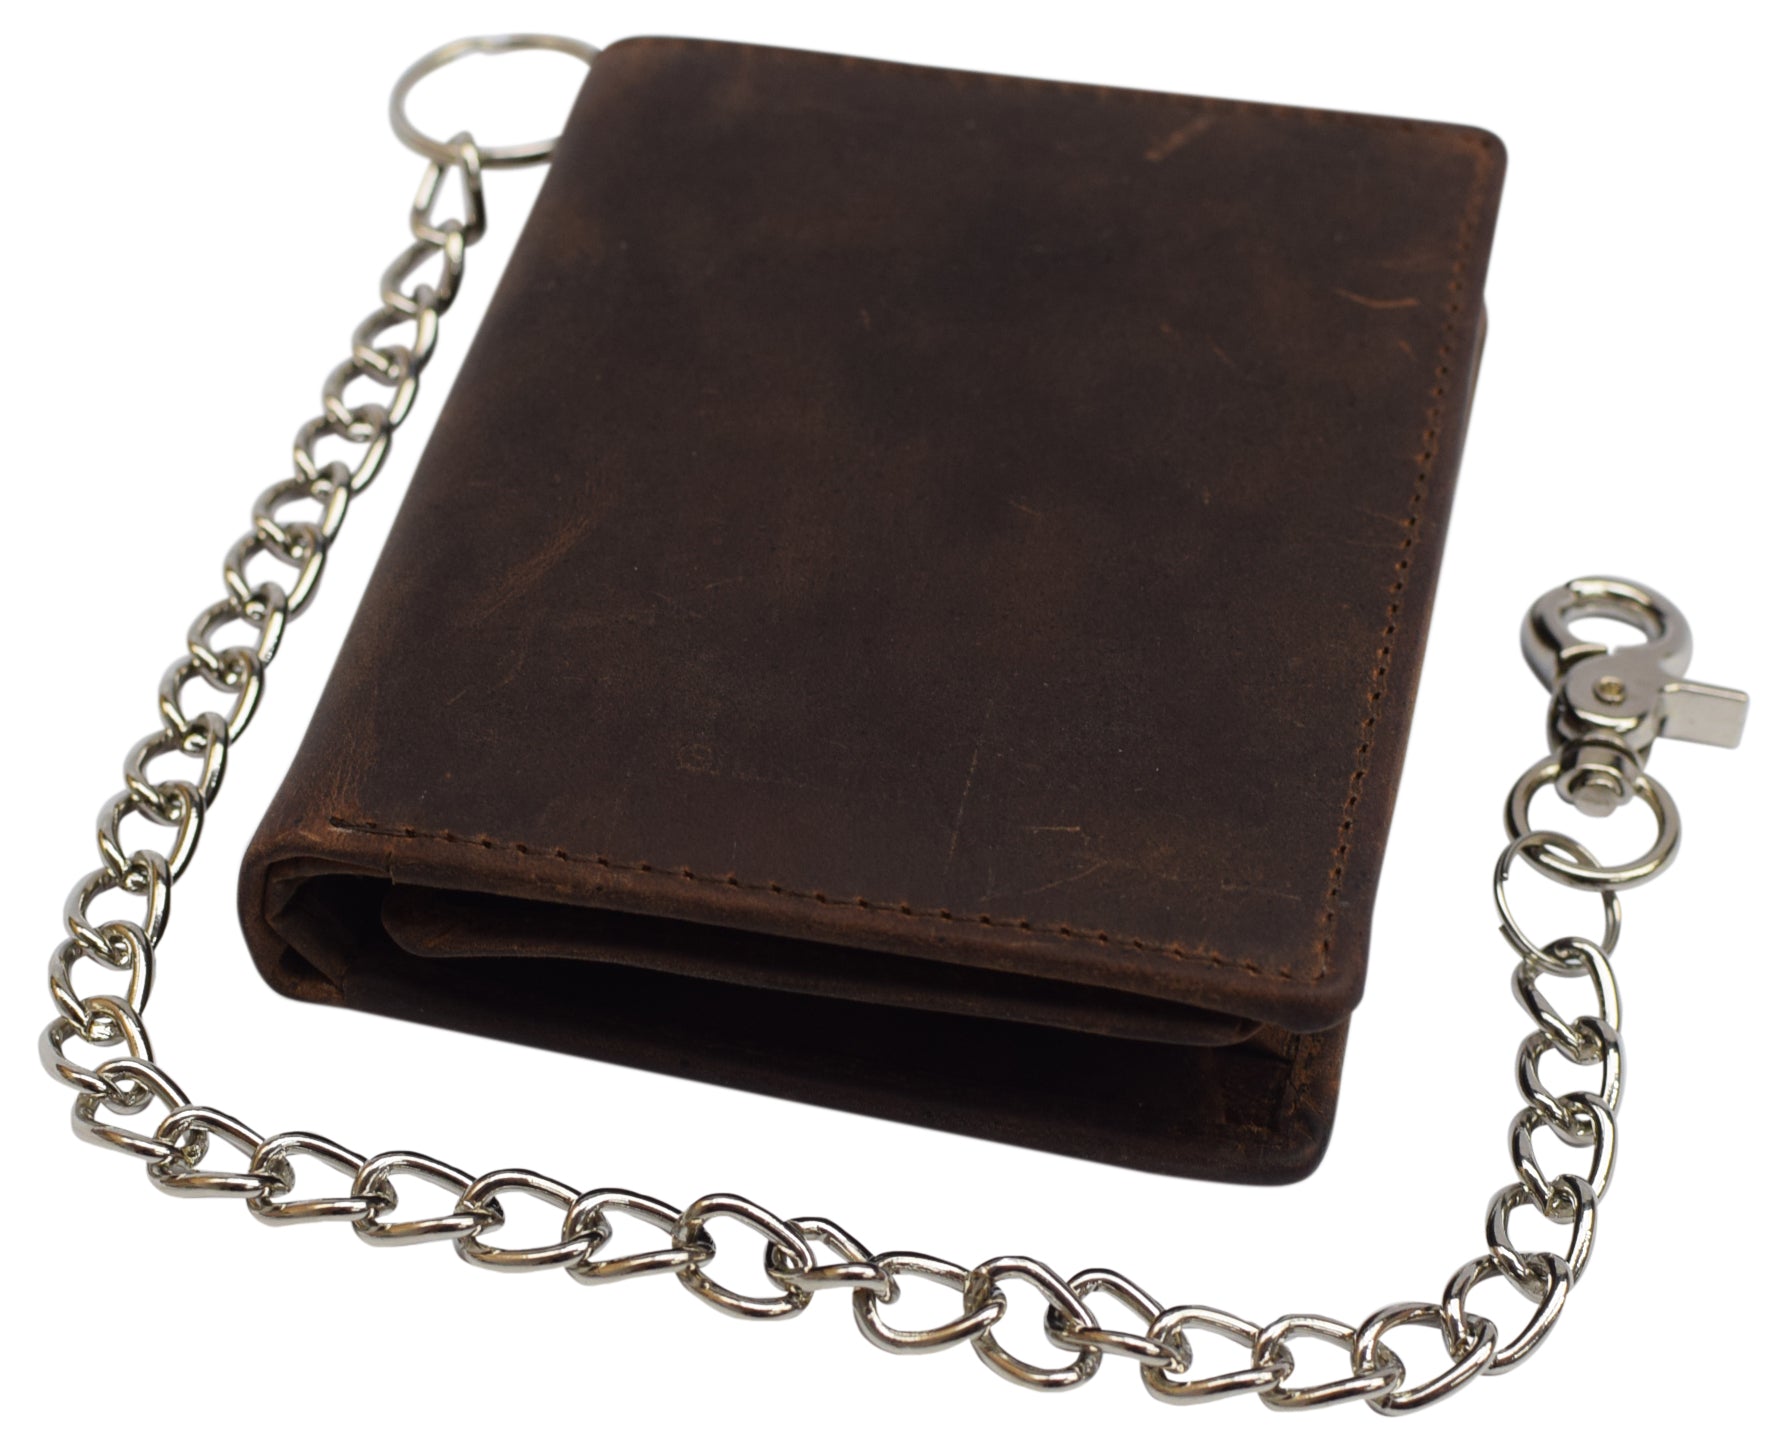 Iron Vintage Cross Large Leather Wallet with Chain | Stylish and Functional Wallet for Men